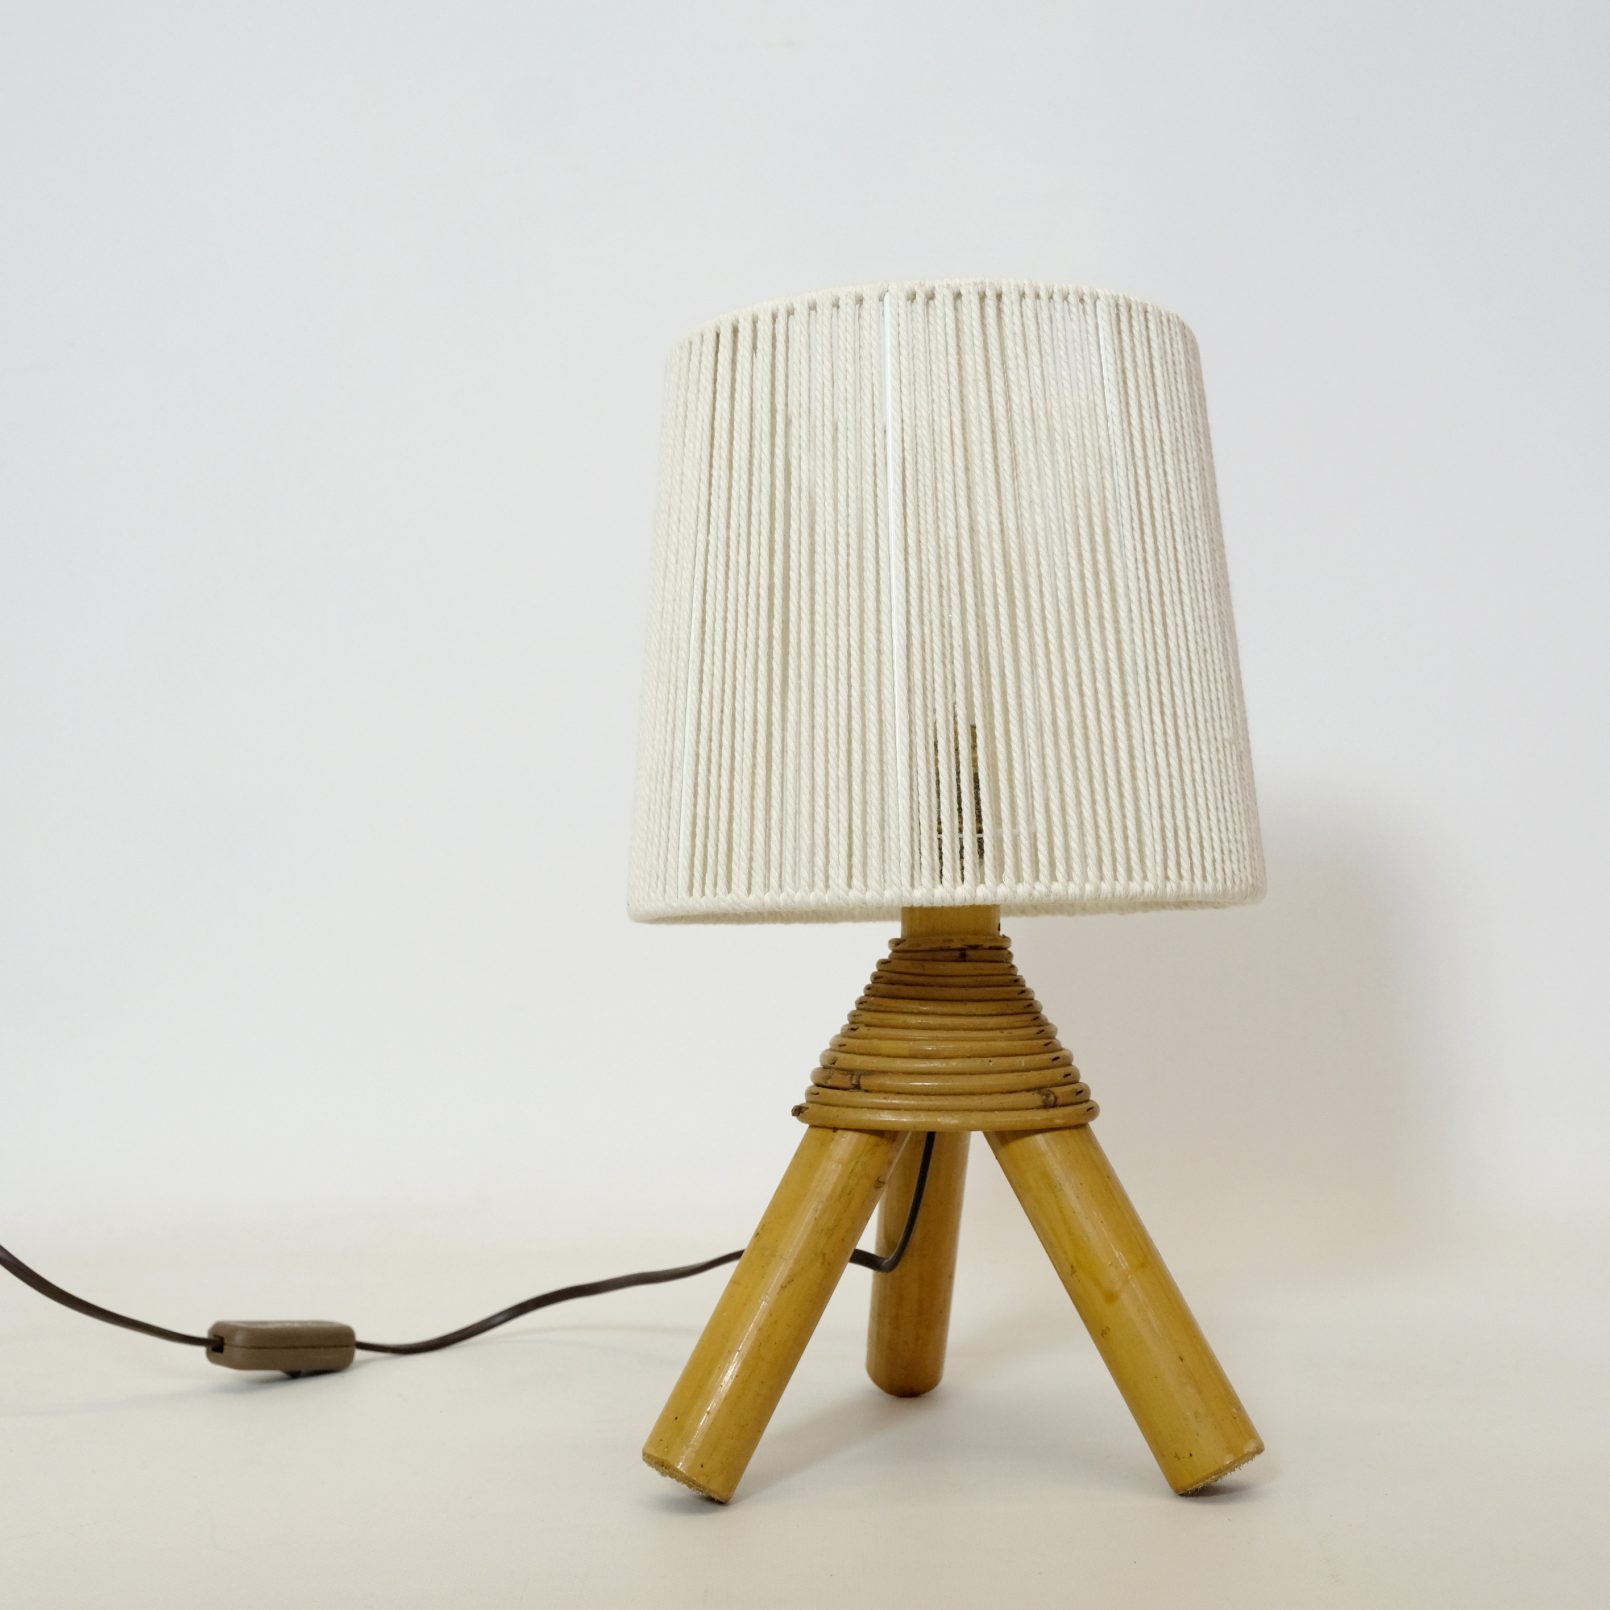 Little bamboo lamp with a rope shade, 1970’s.